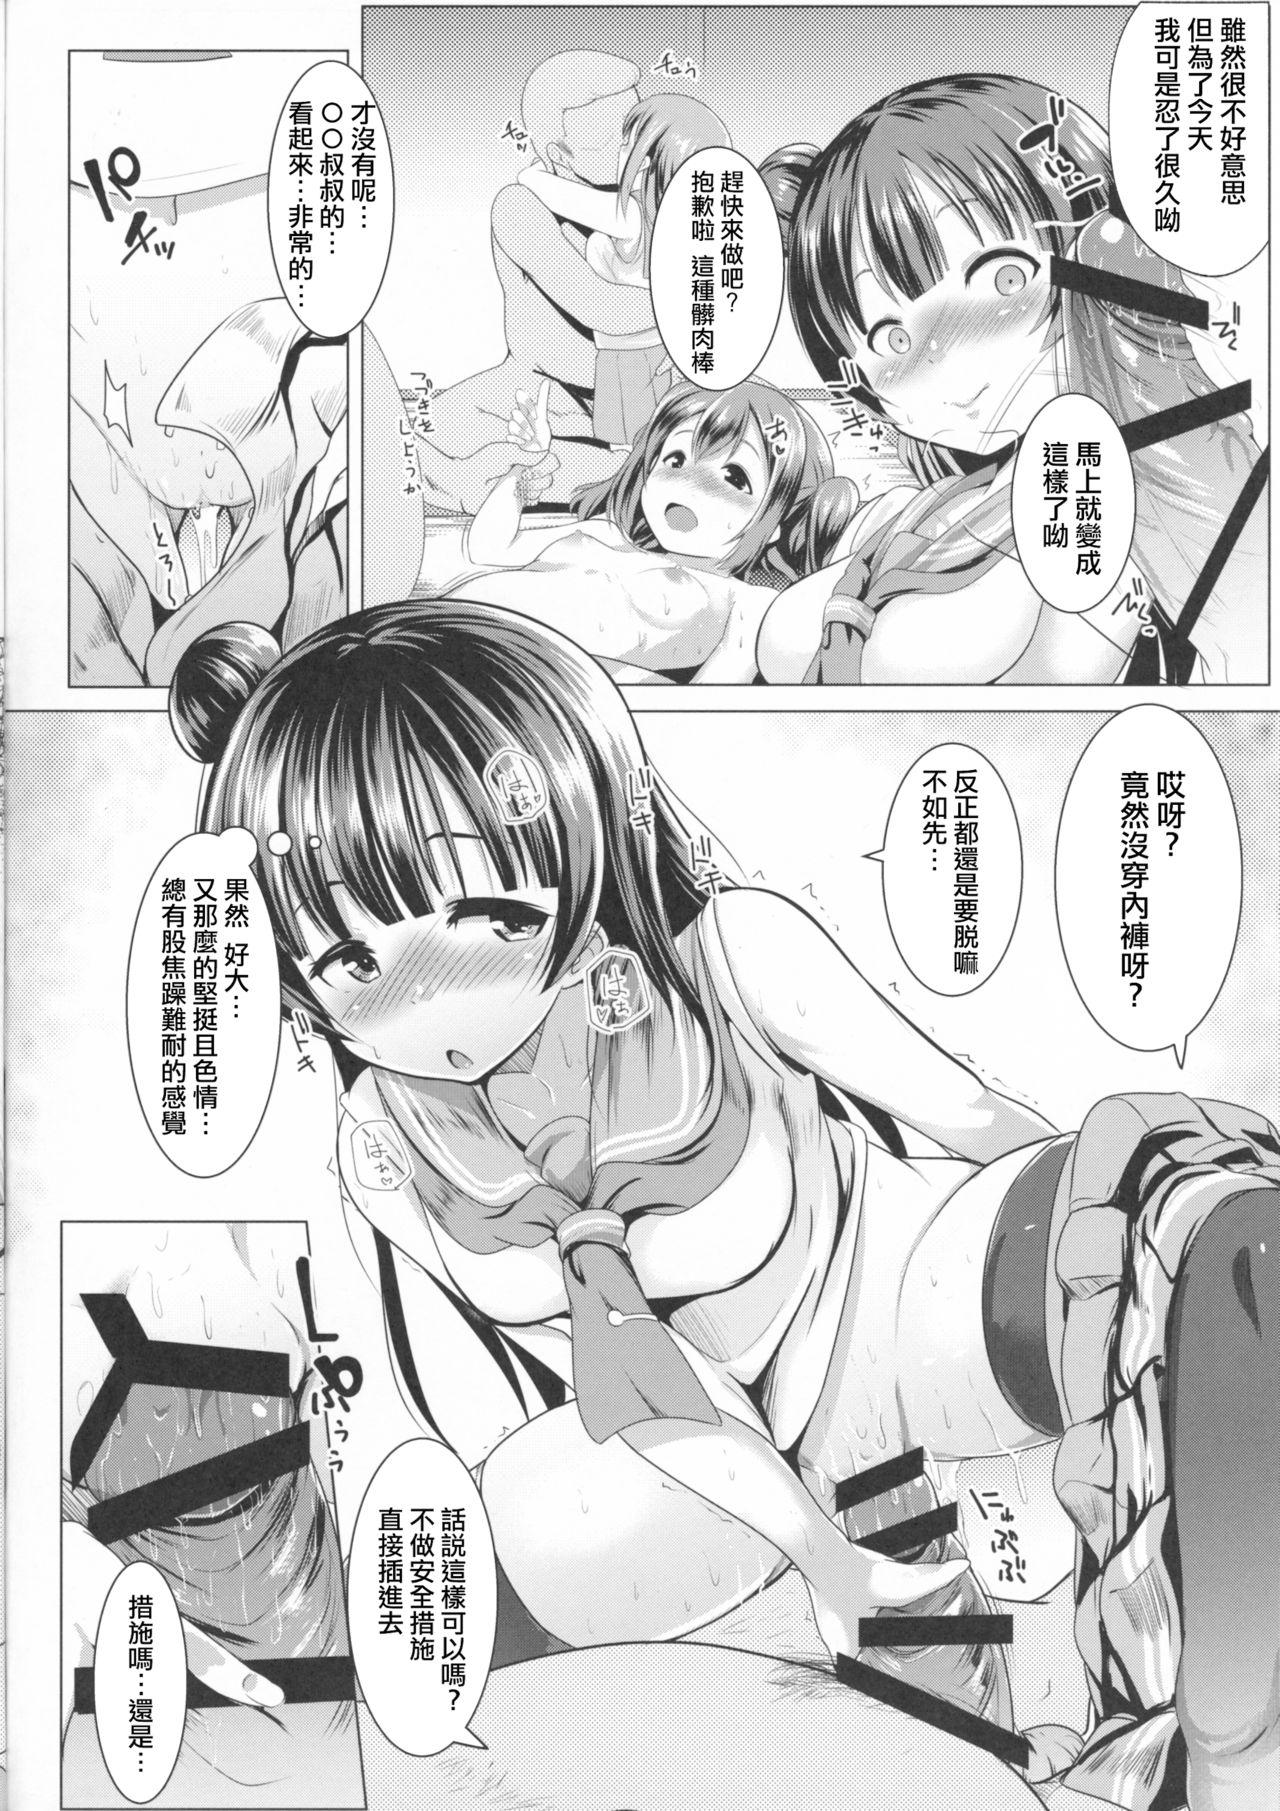 Fisting SUMMER PROMISCUITY with Yoshimaruby - Love live sunshine Amateurs - Page 7